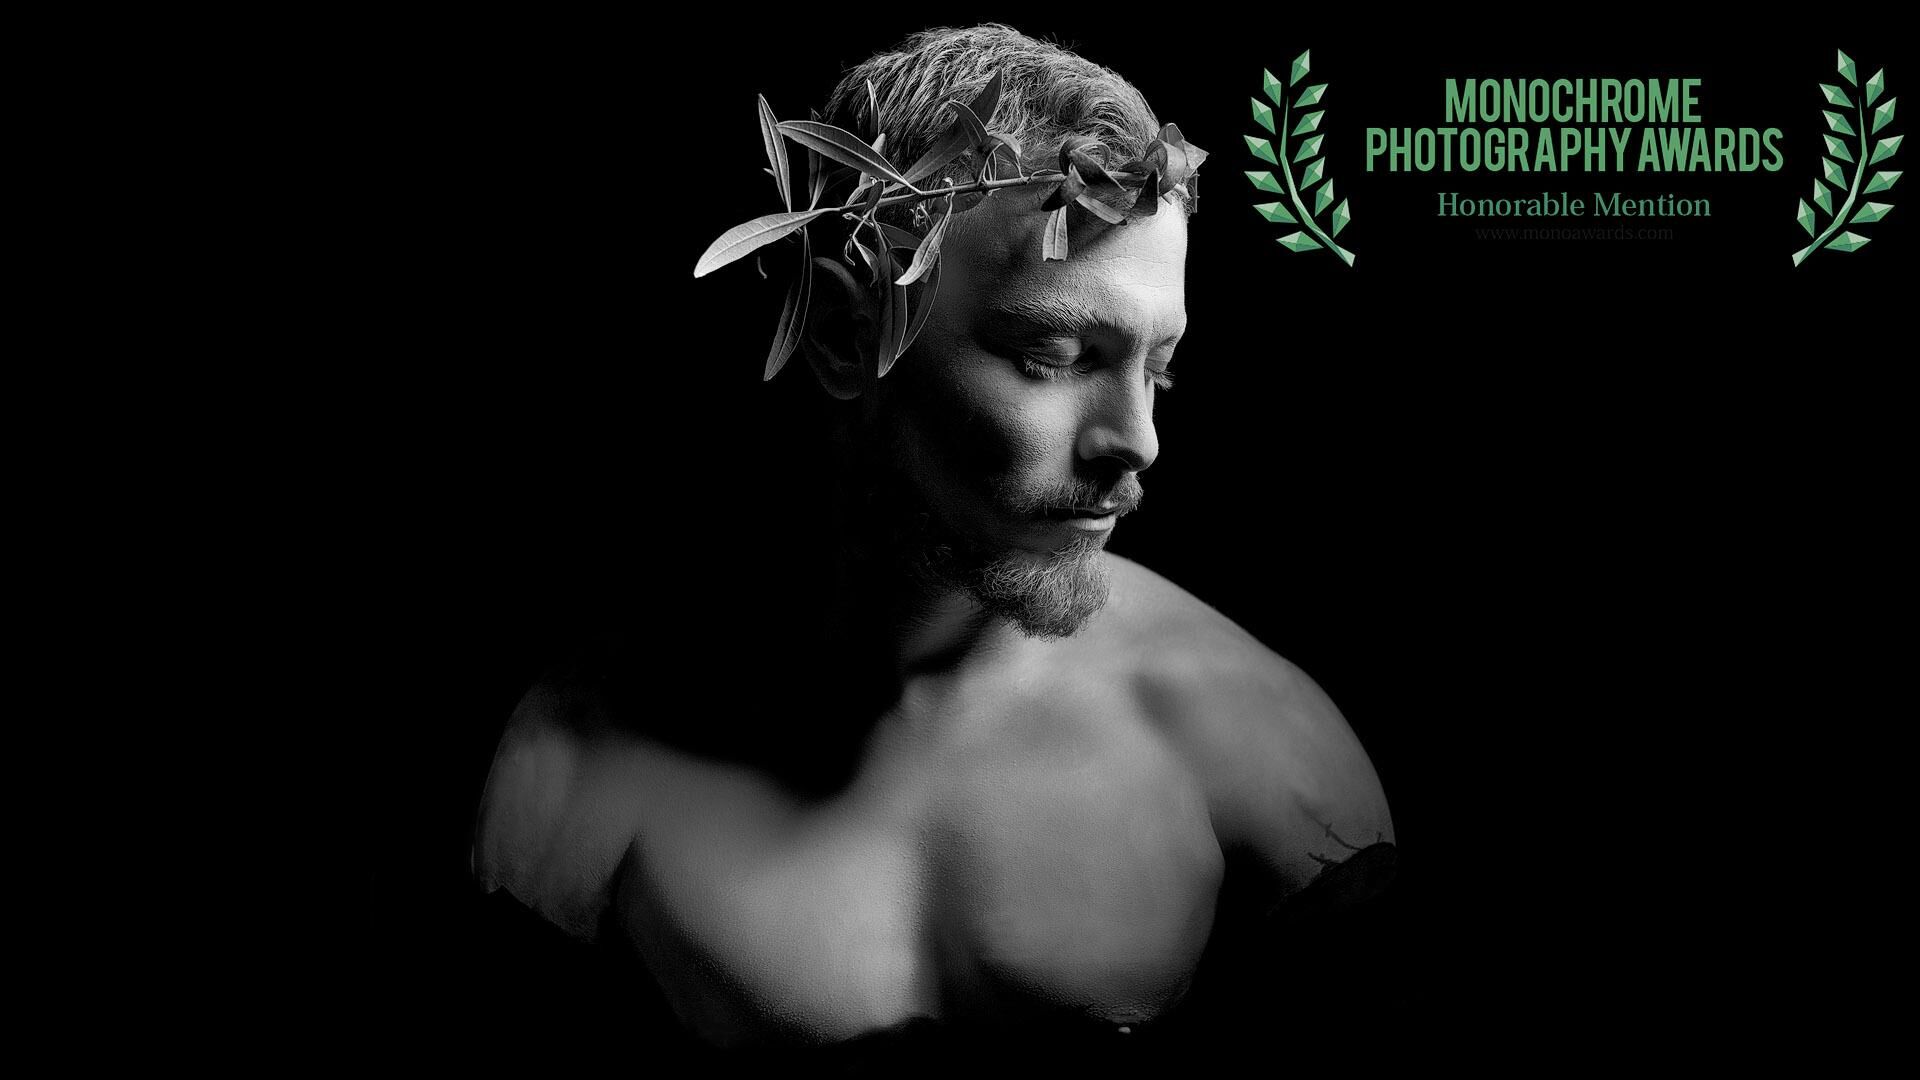 Honorable Mention in Monochrome Photography Awards